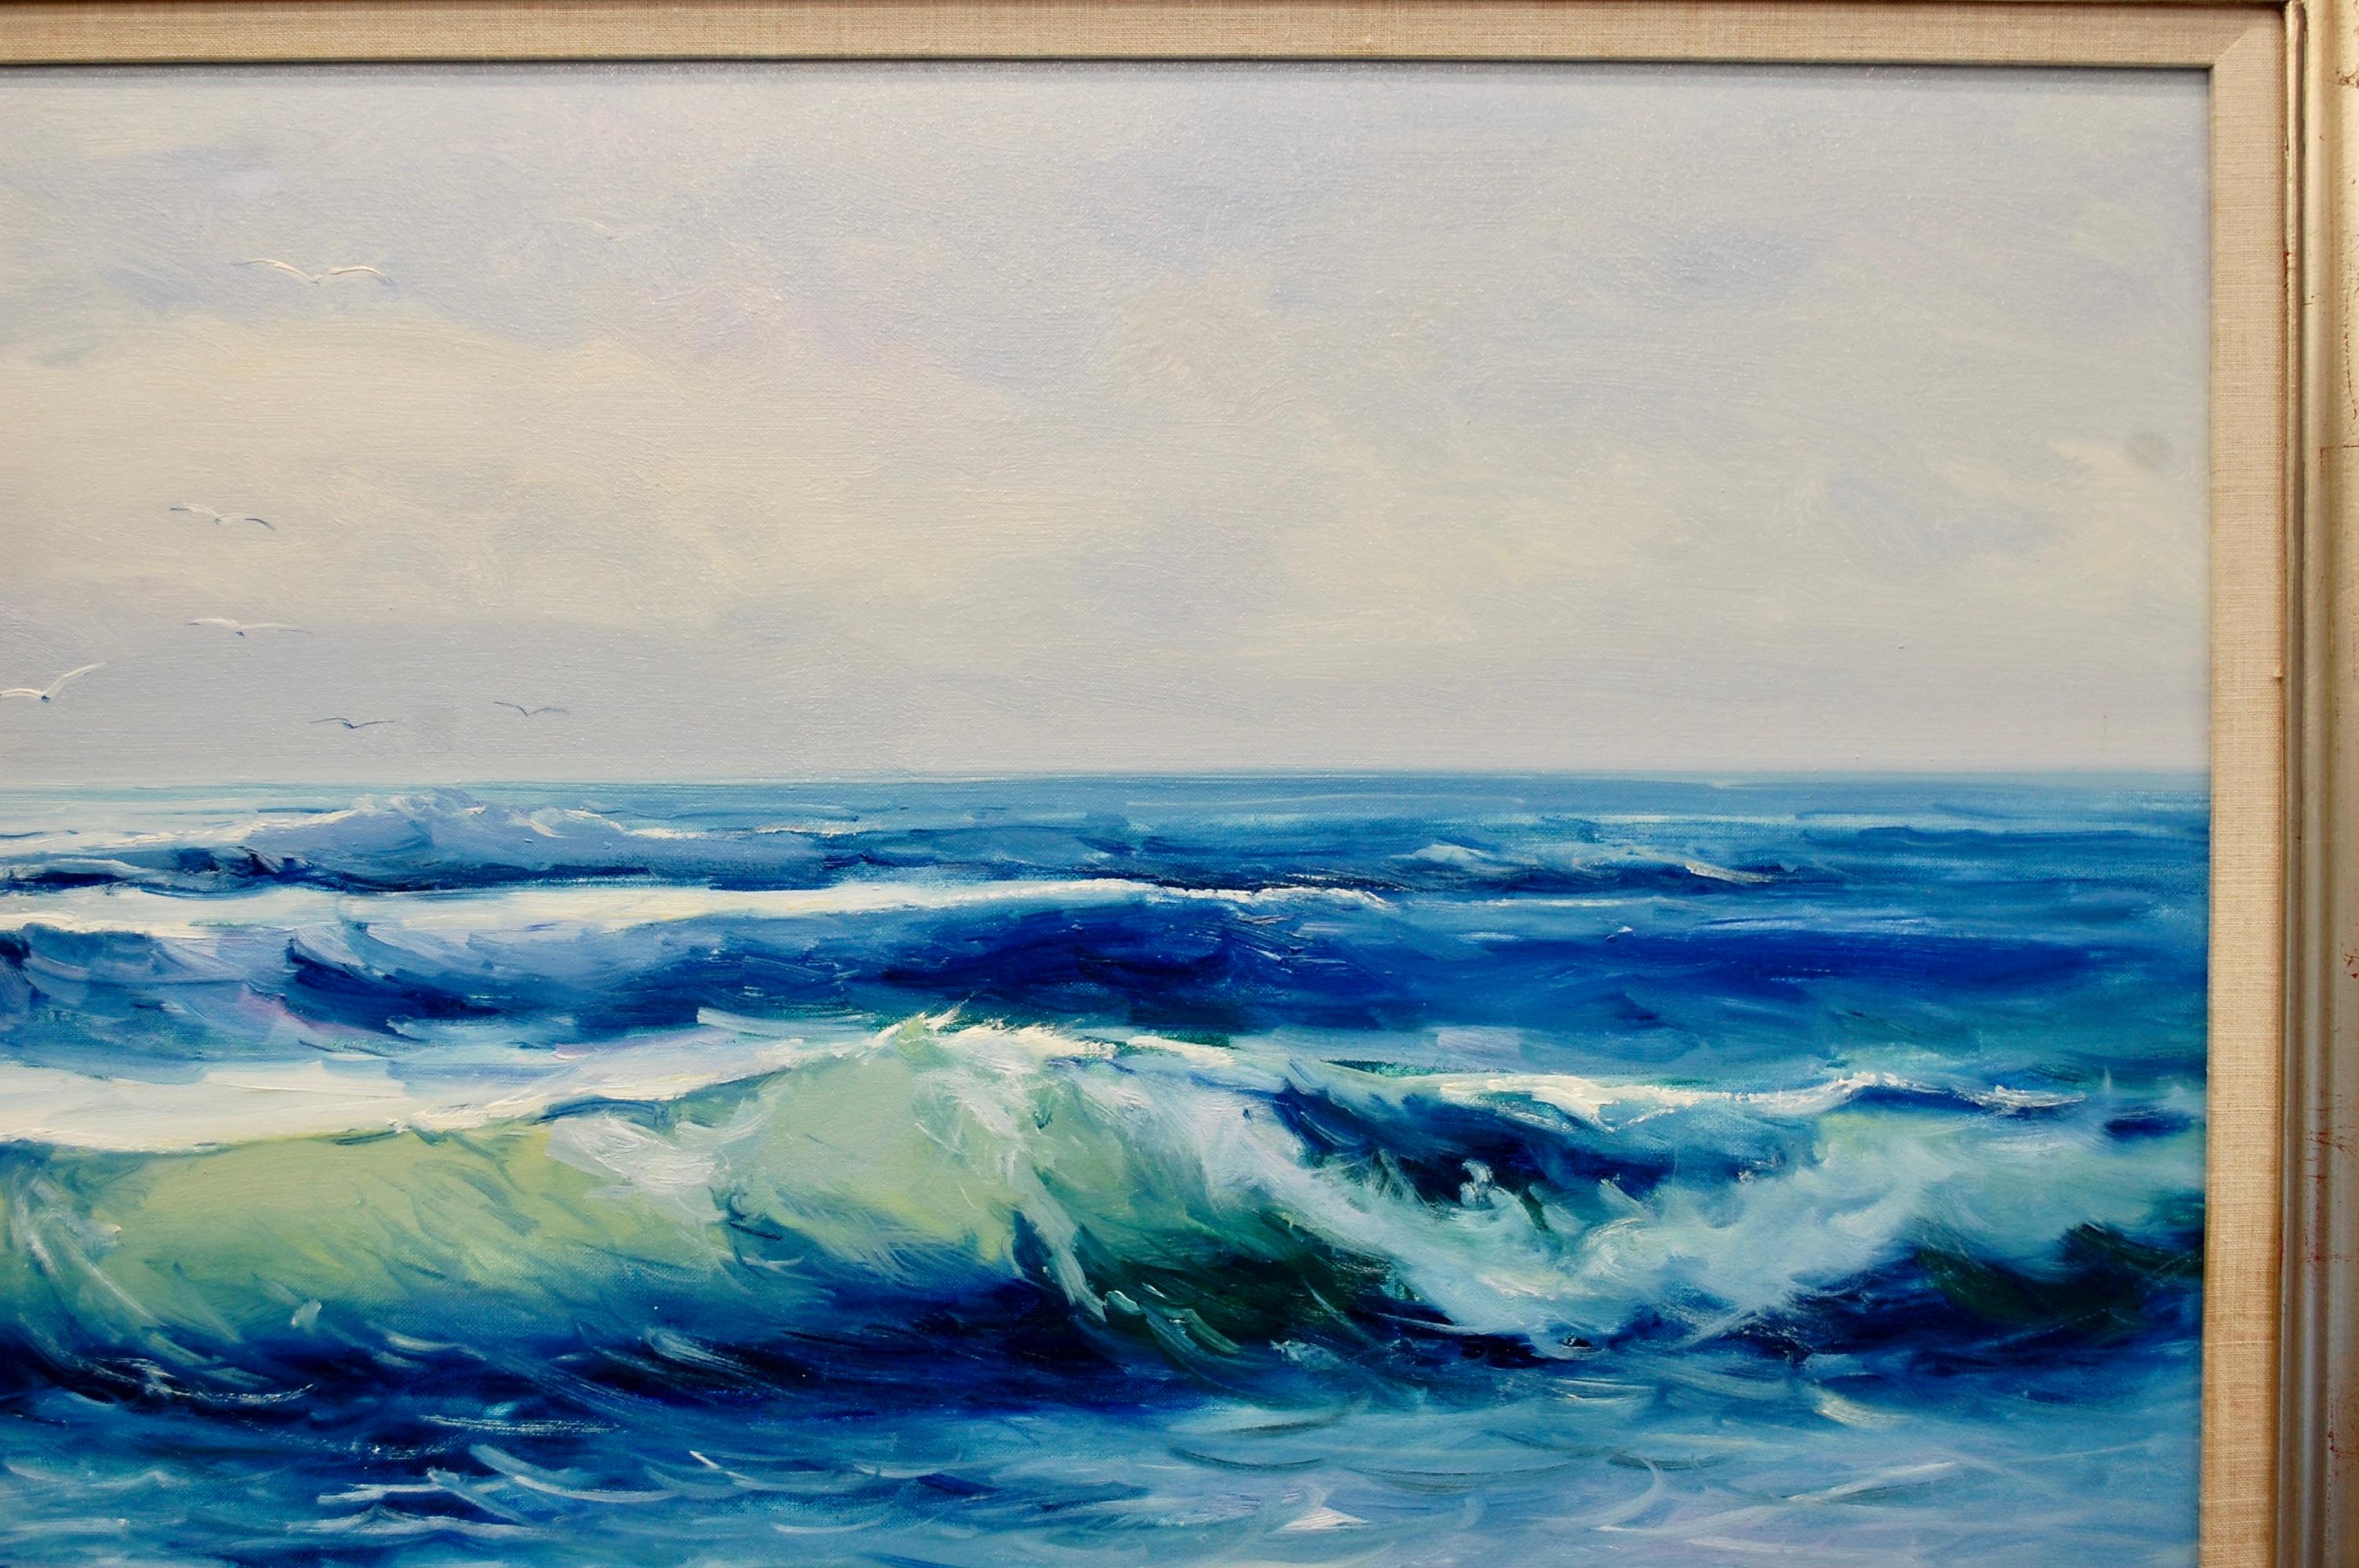  Seascape  - Contemporary Painting by Joan Segrelles